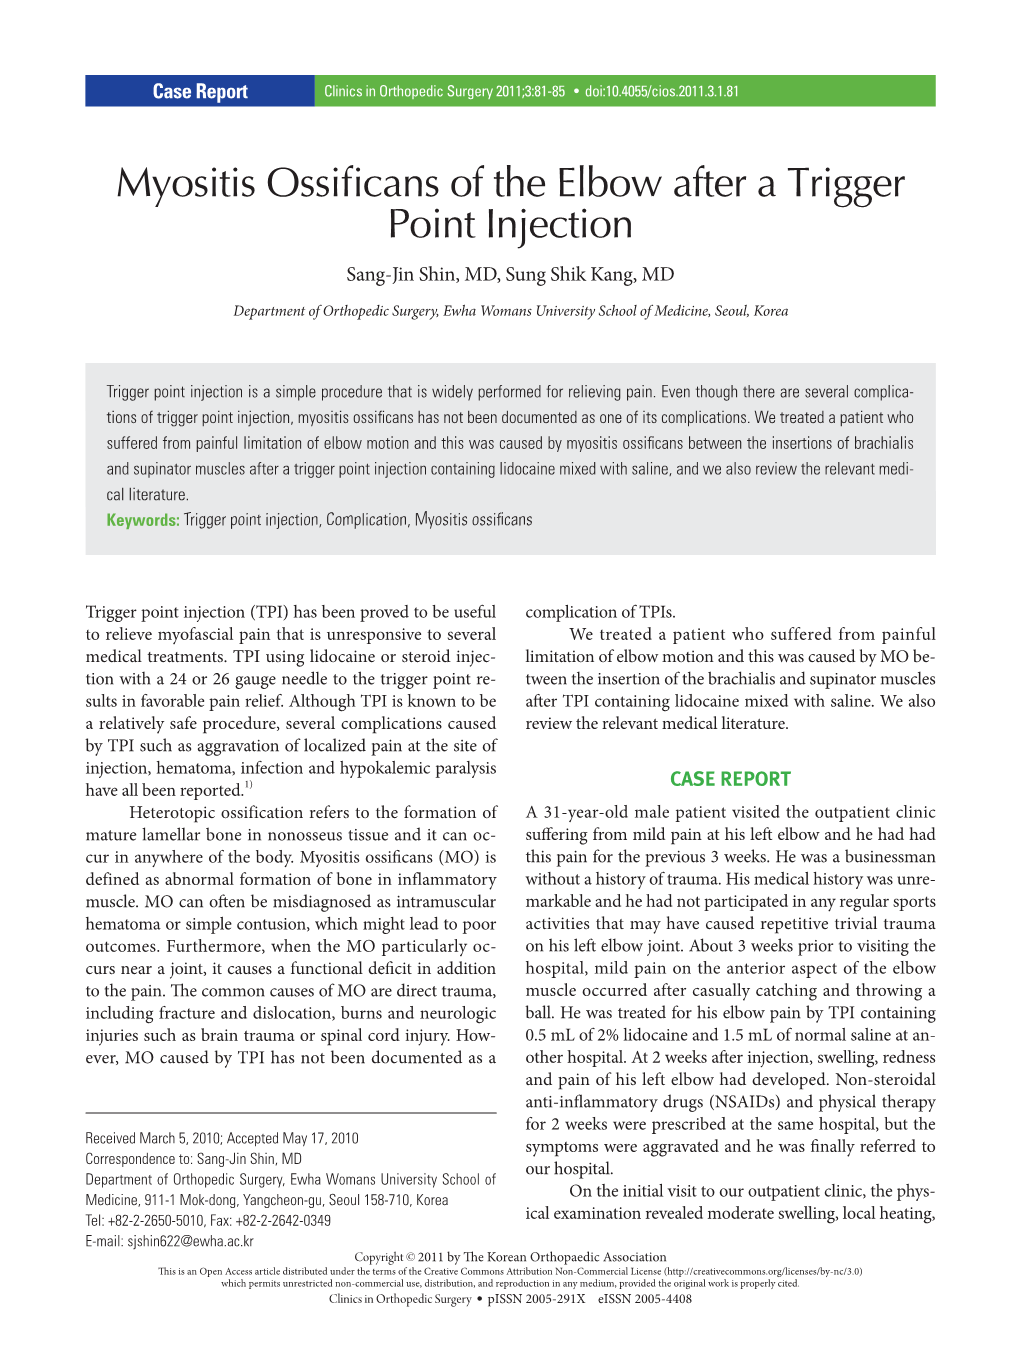 Myositis Ossificans of the Elbow After a Trigger Point Injection